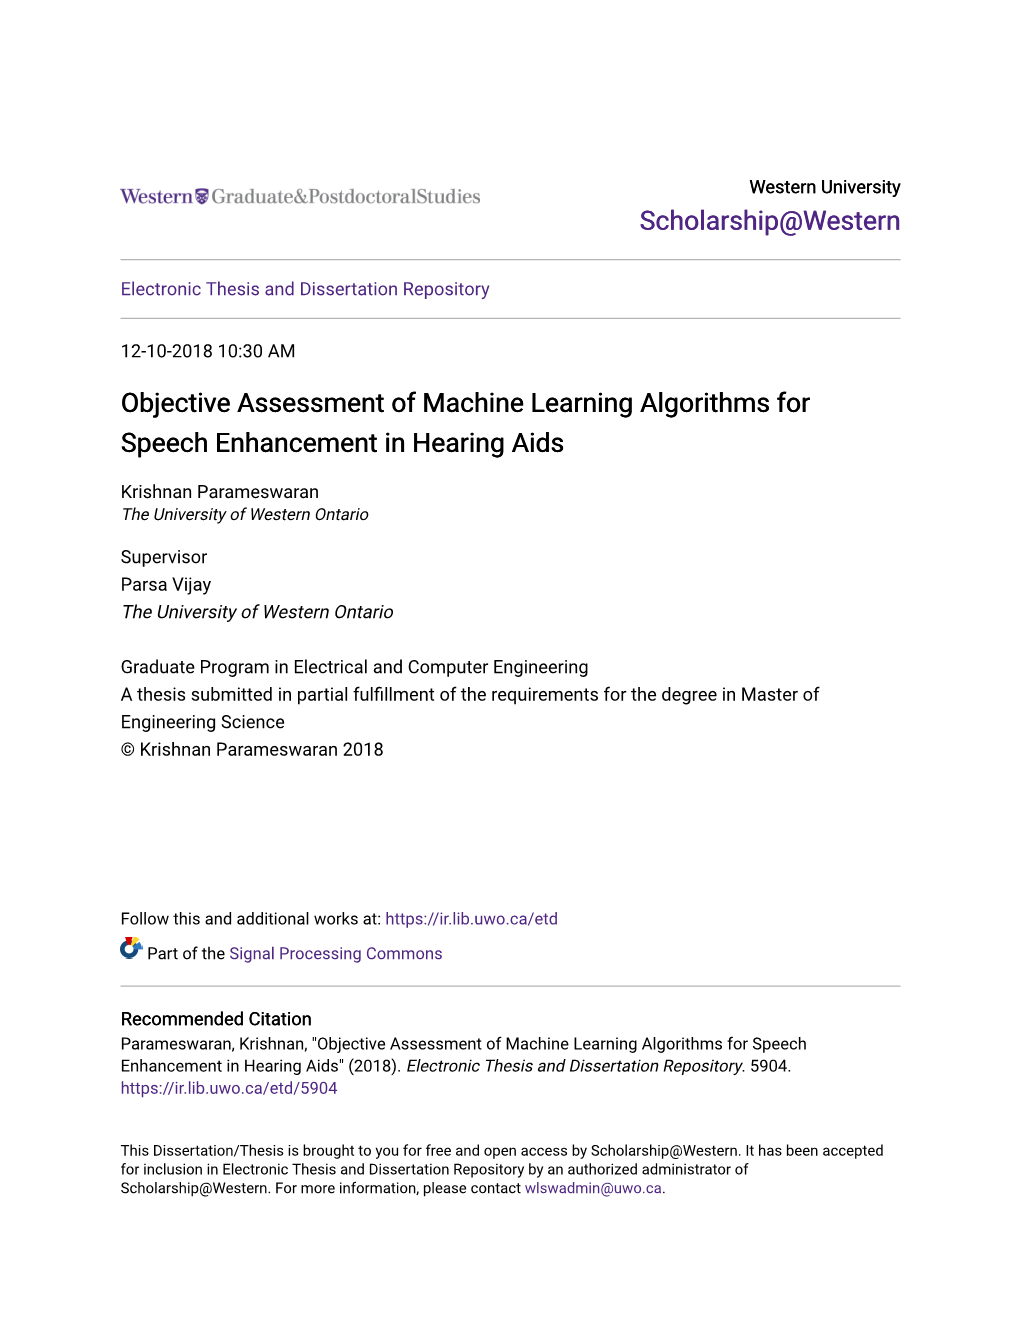 Objective Assessment of Machine Learning Algorithms for Speech Enhancement in Hearing Aids